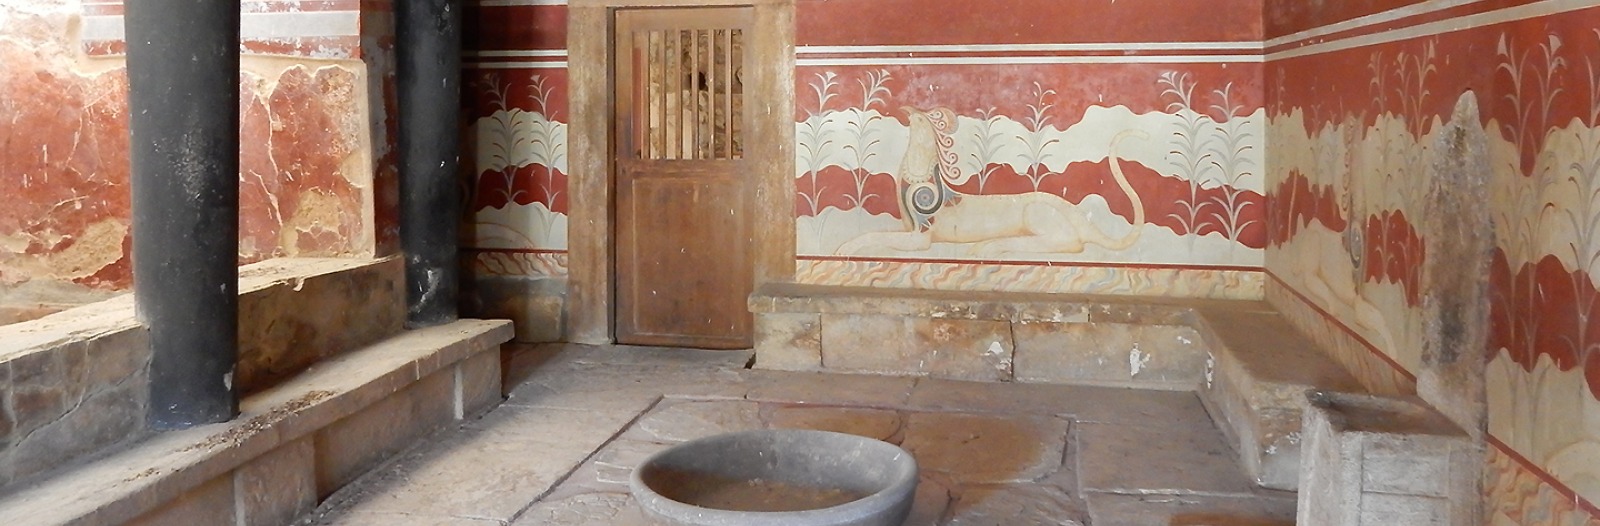 Red room at the Palace at Knossos, Crete